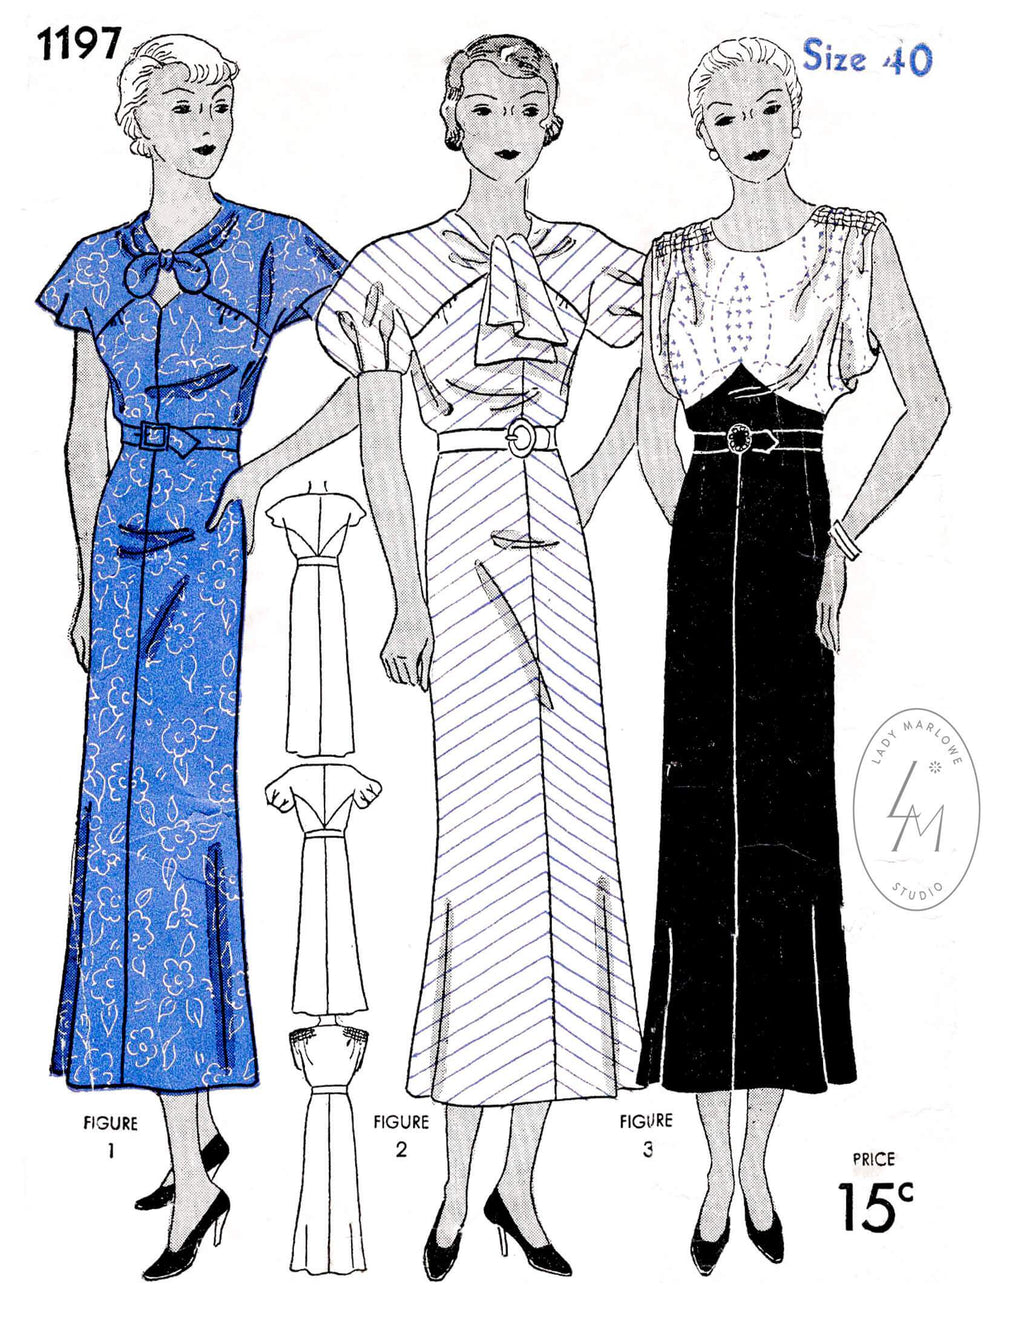 Simplicity 1197 1930s dress vintage sewing pattern reproduction